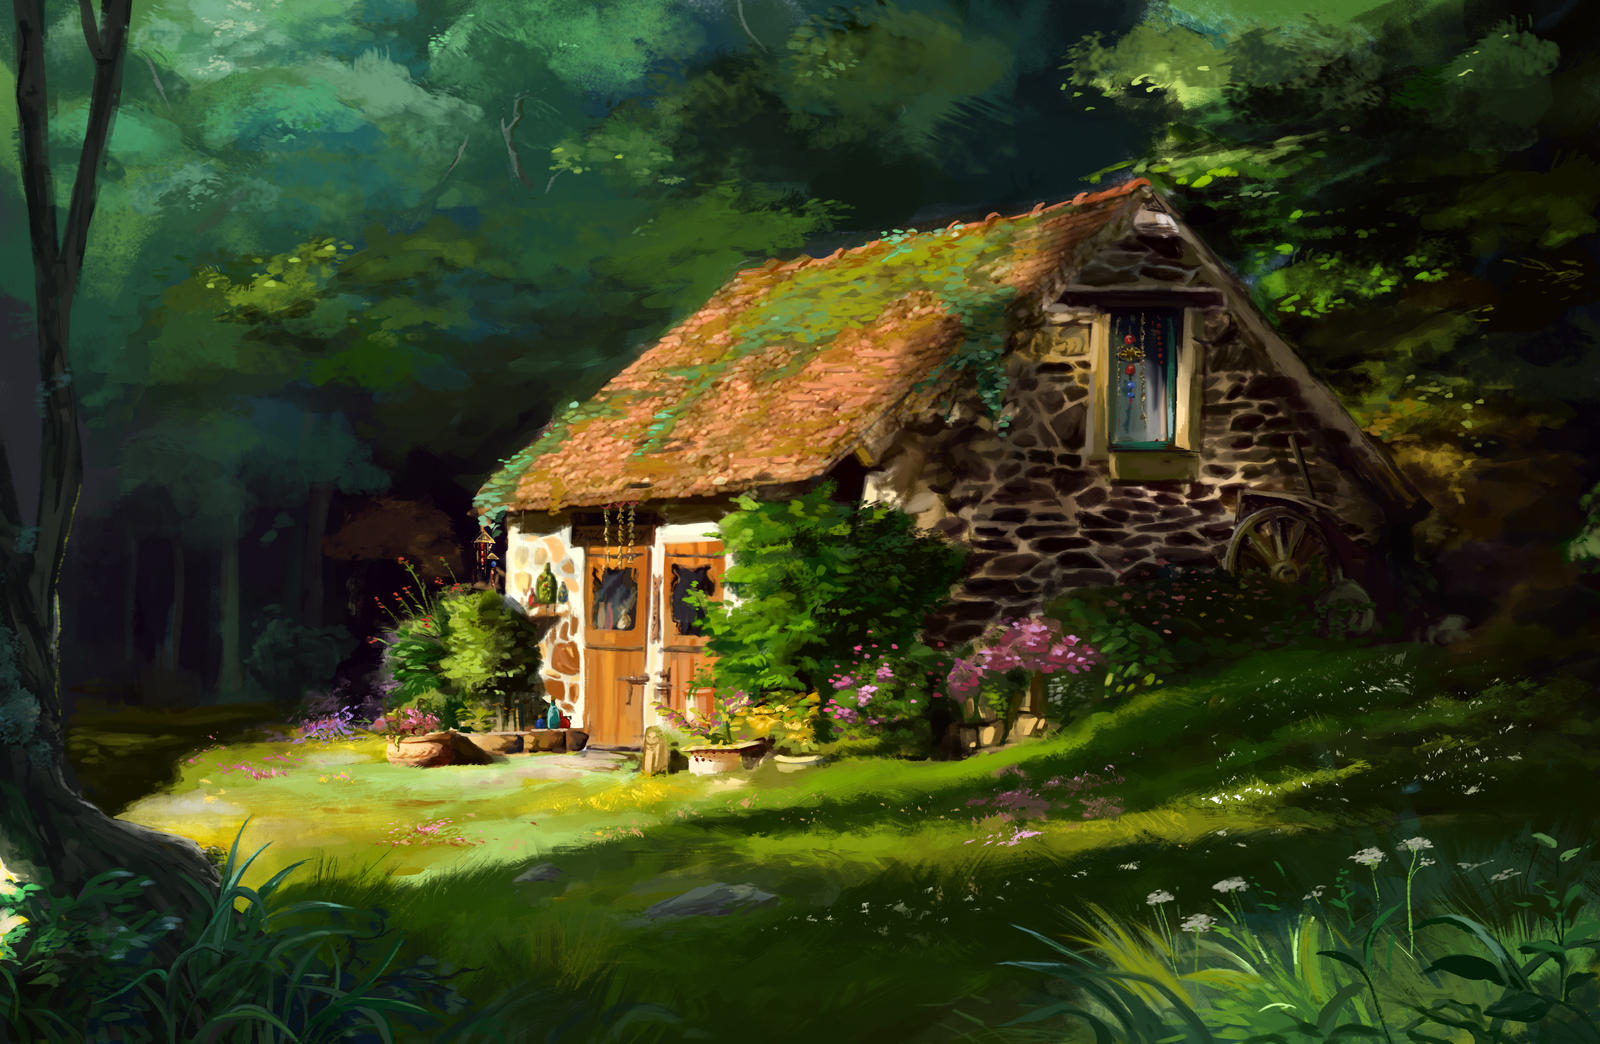 Witch's house by Muns11 on DeviantArt